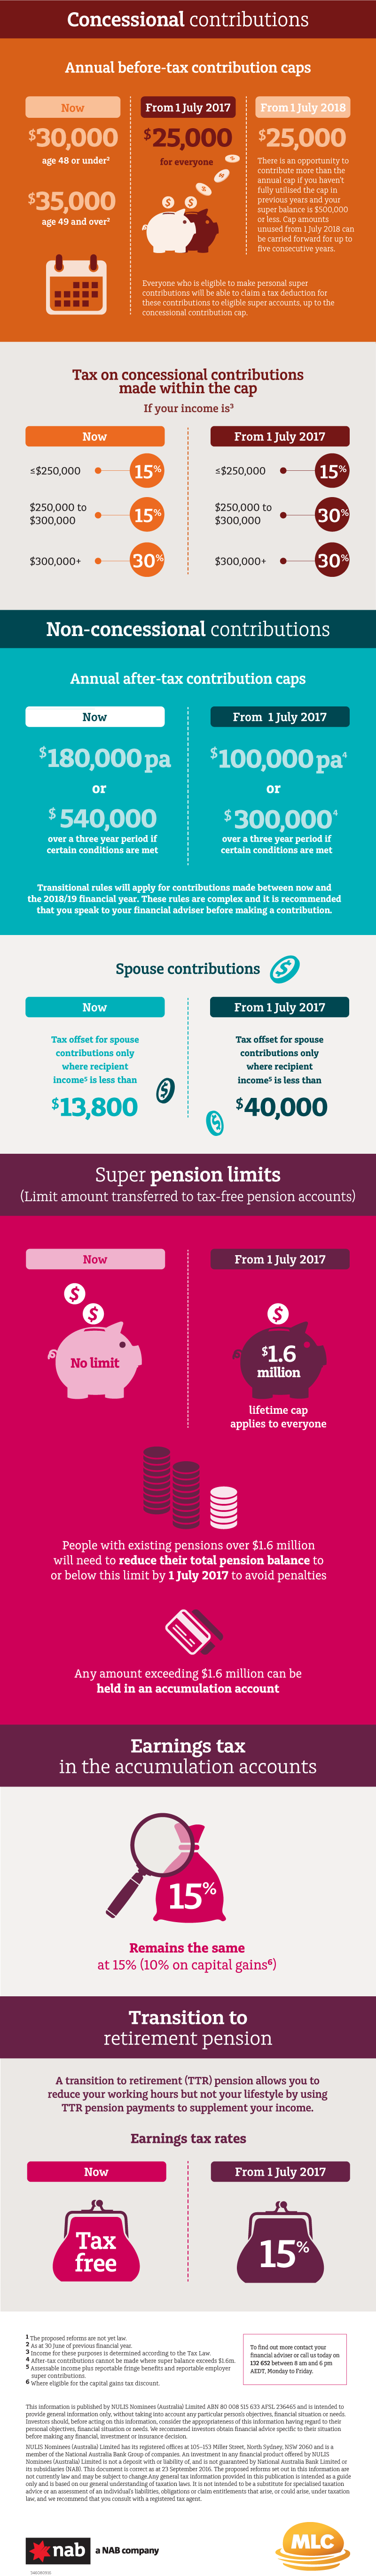 proposed_super_reforms_infographic